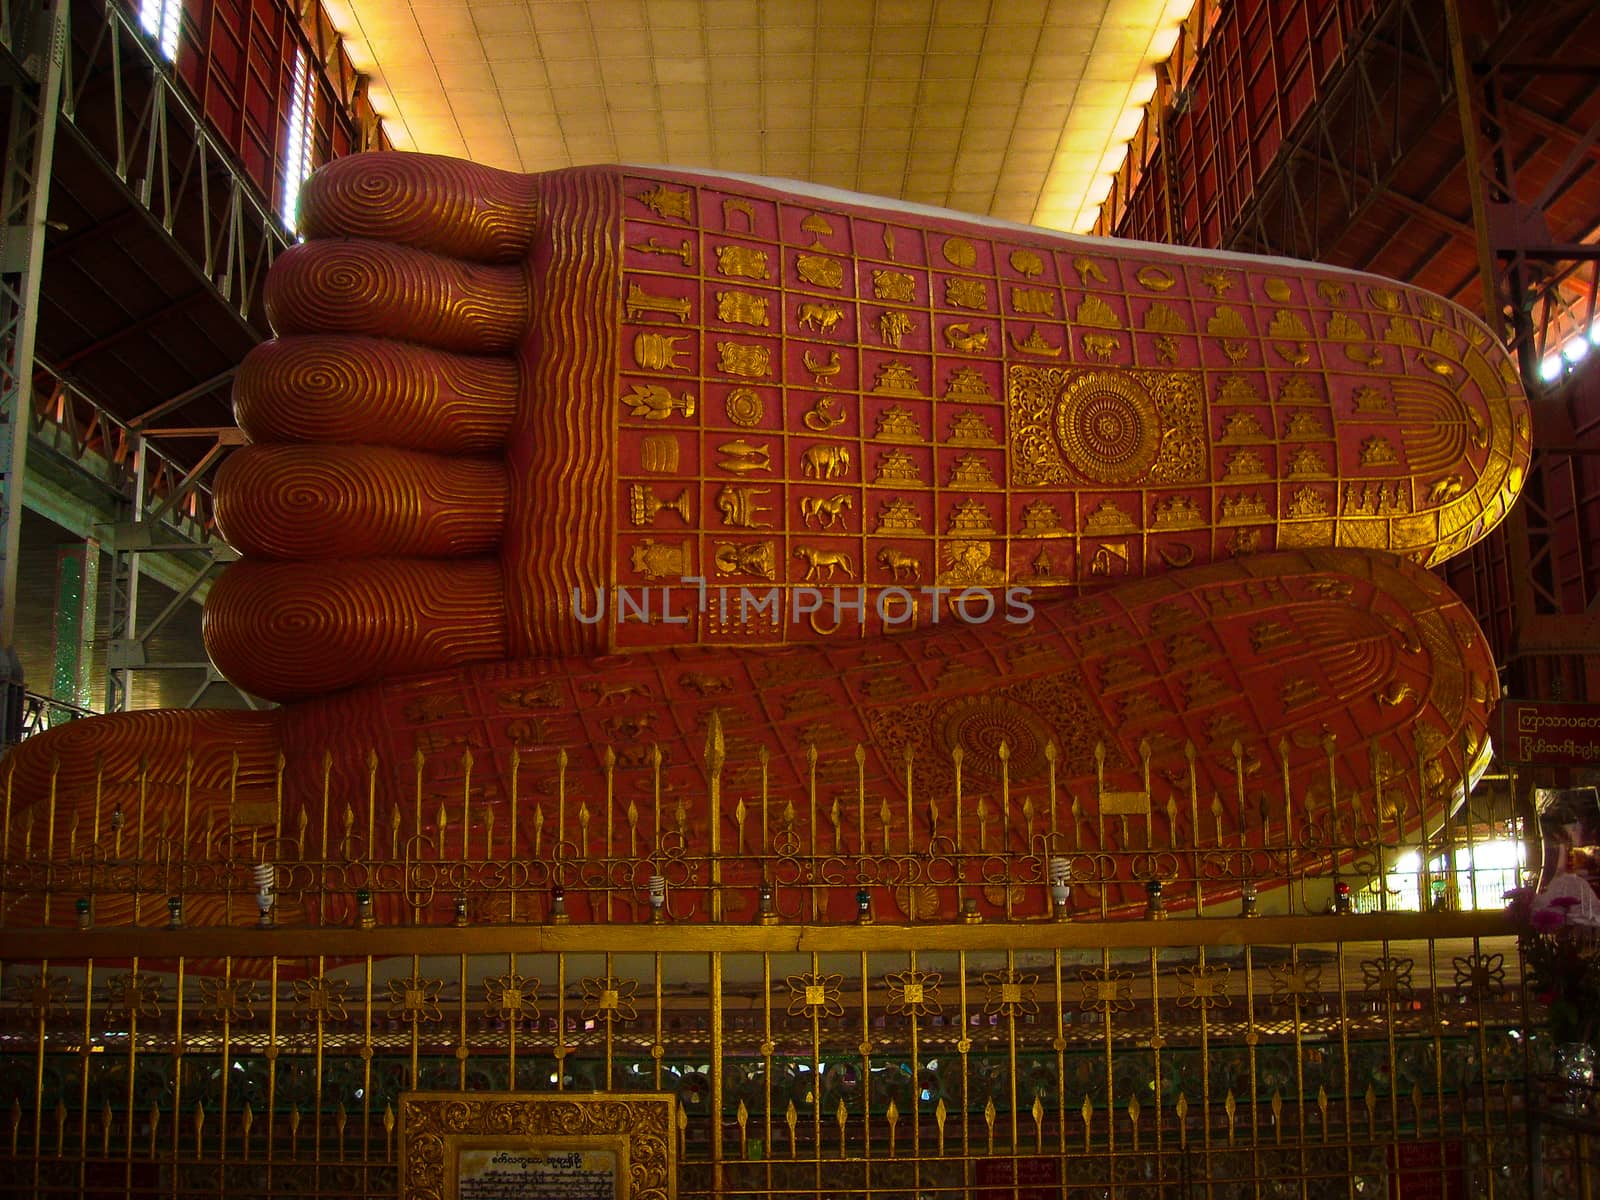 big foots in a temple in burma by Tevion25